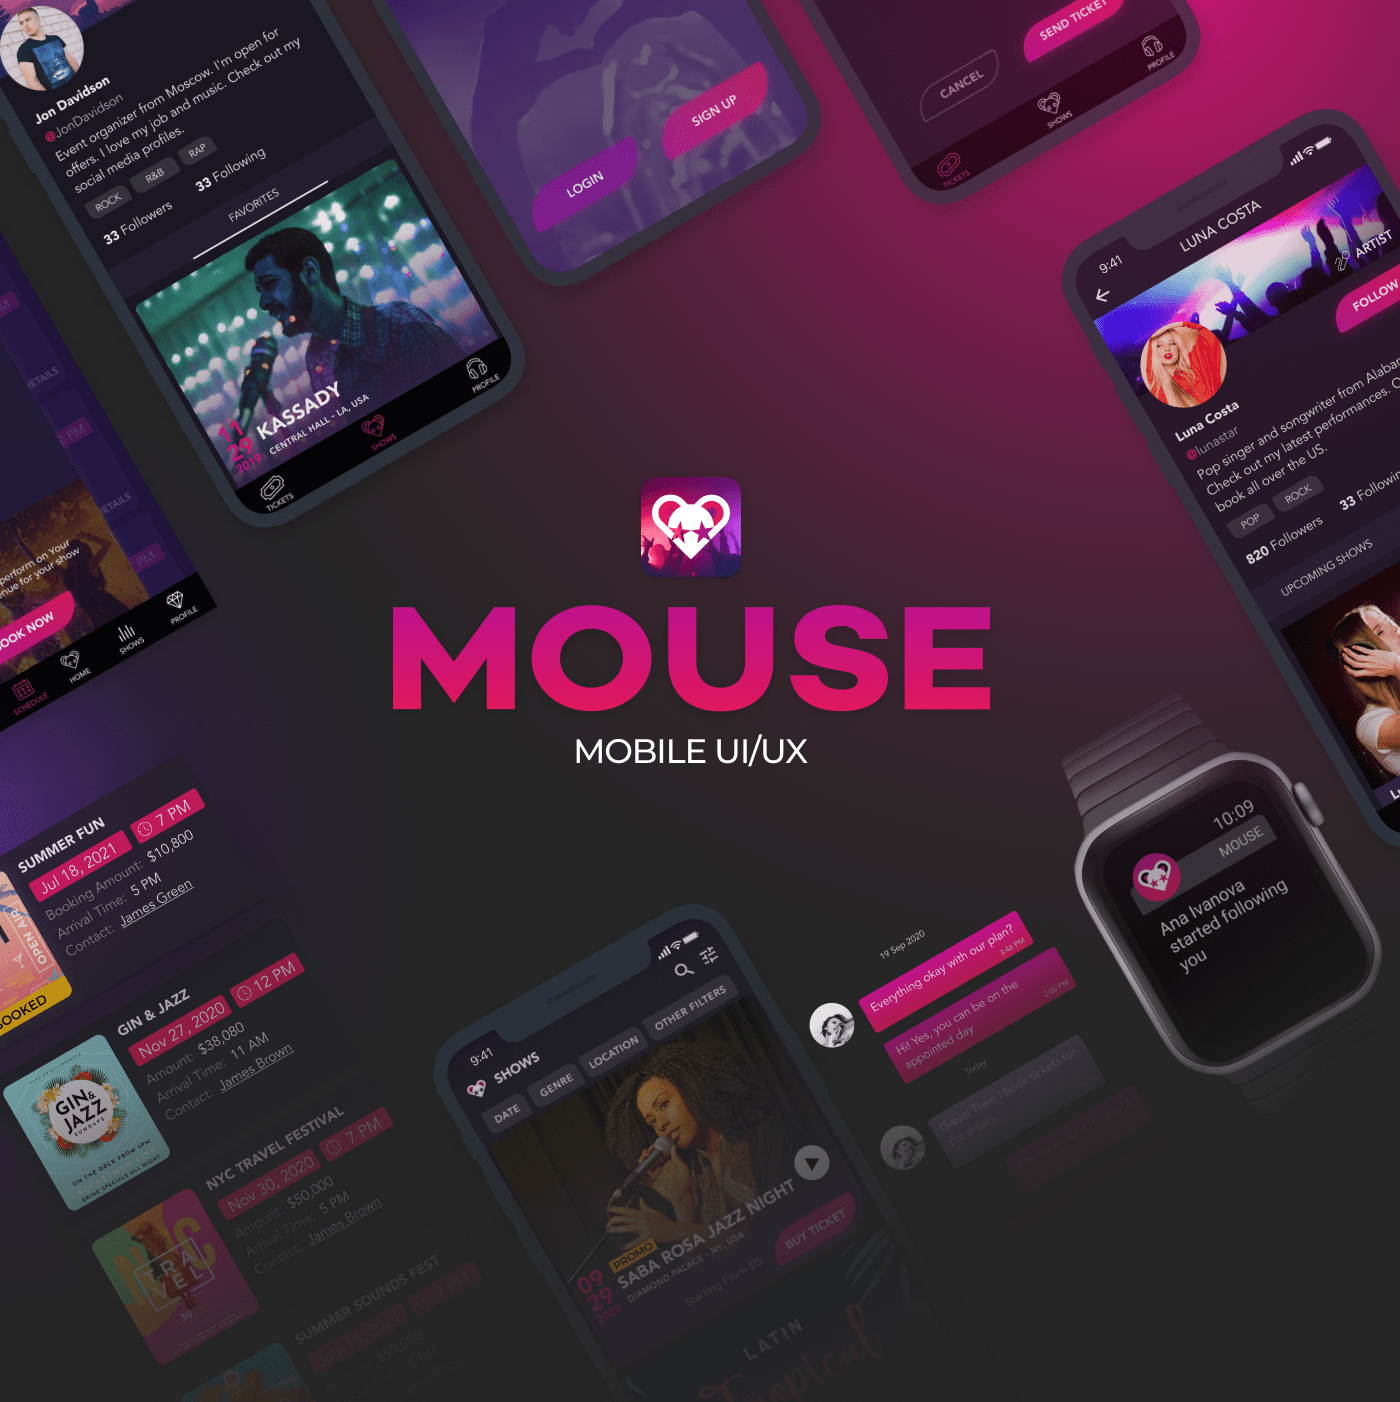 MOUSE mobile UI/UX